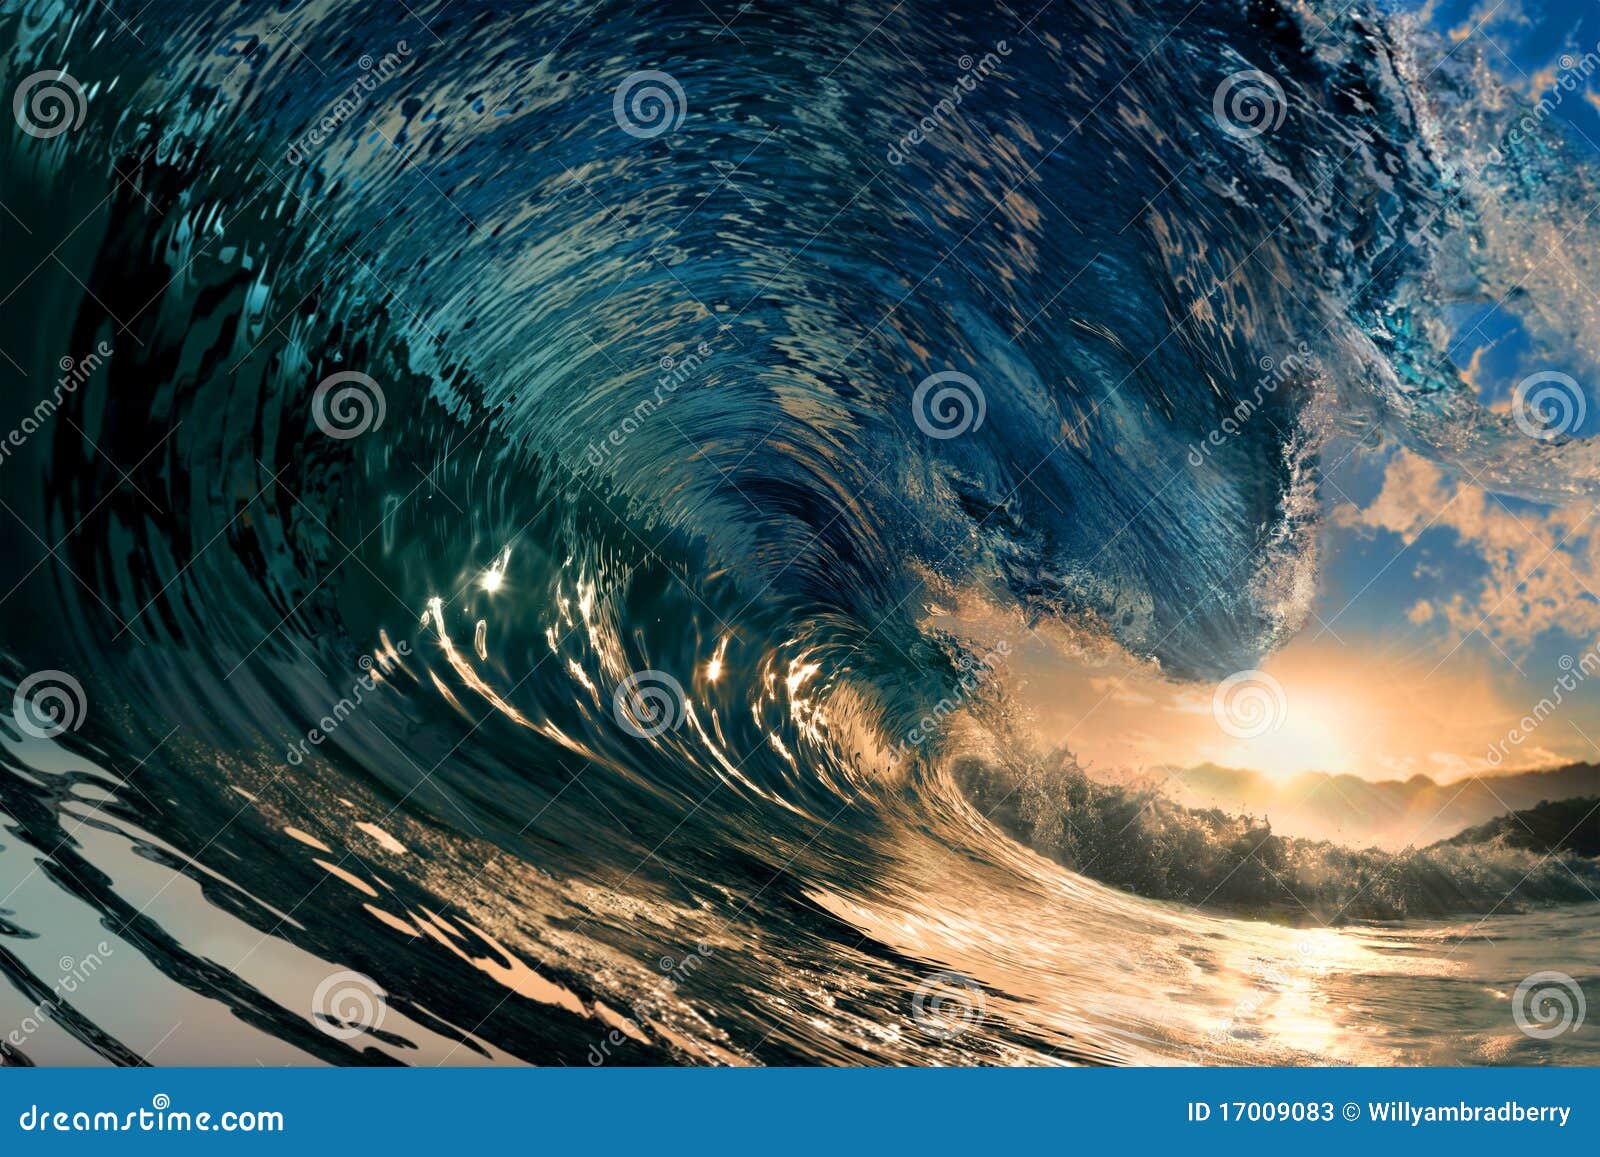 sunset on the beach with ocean wave